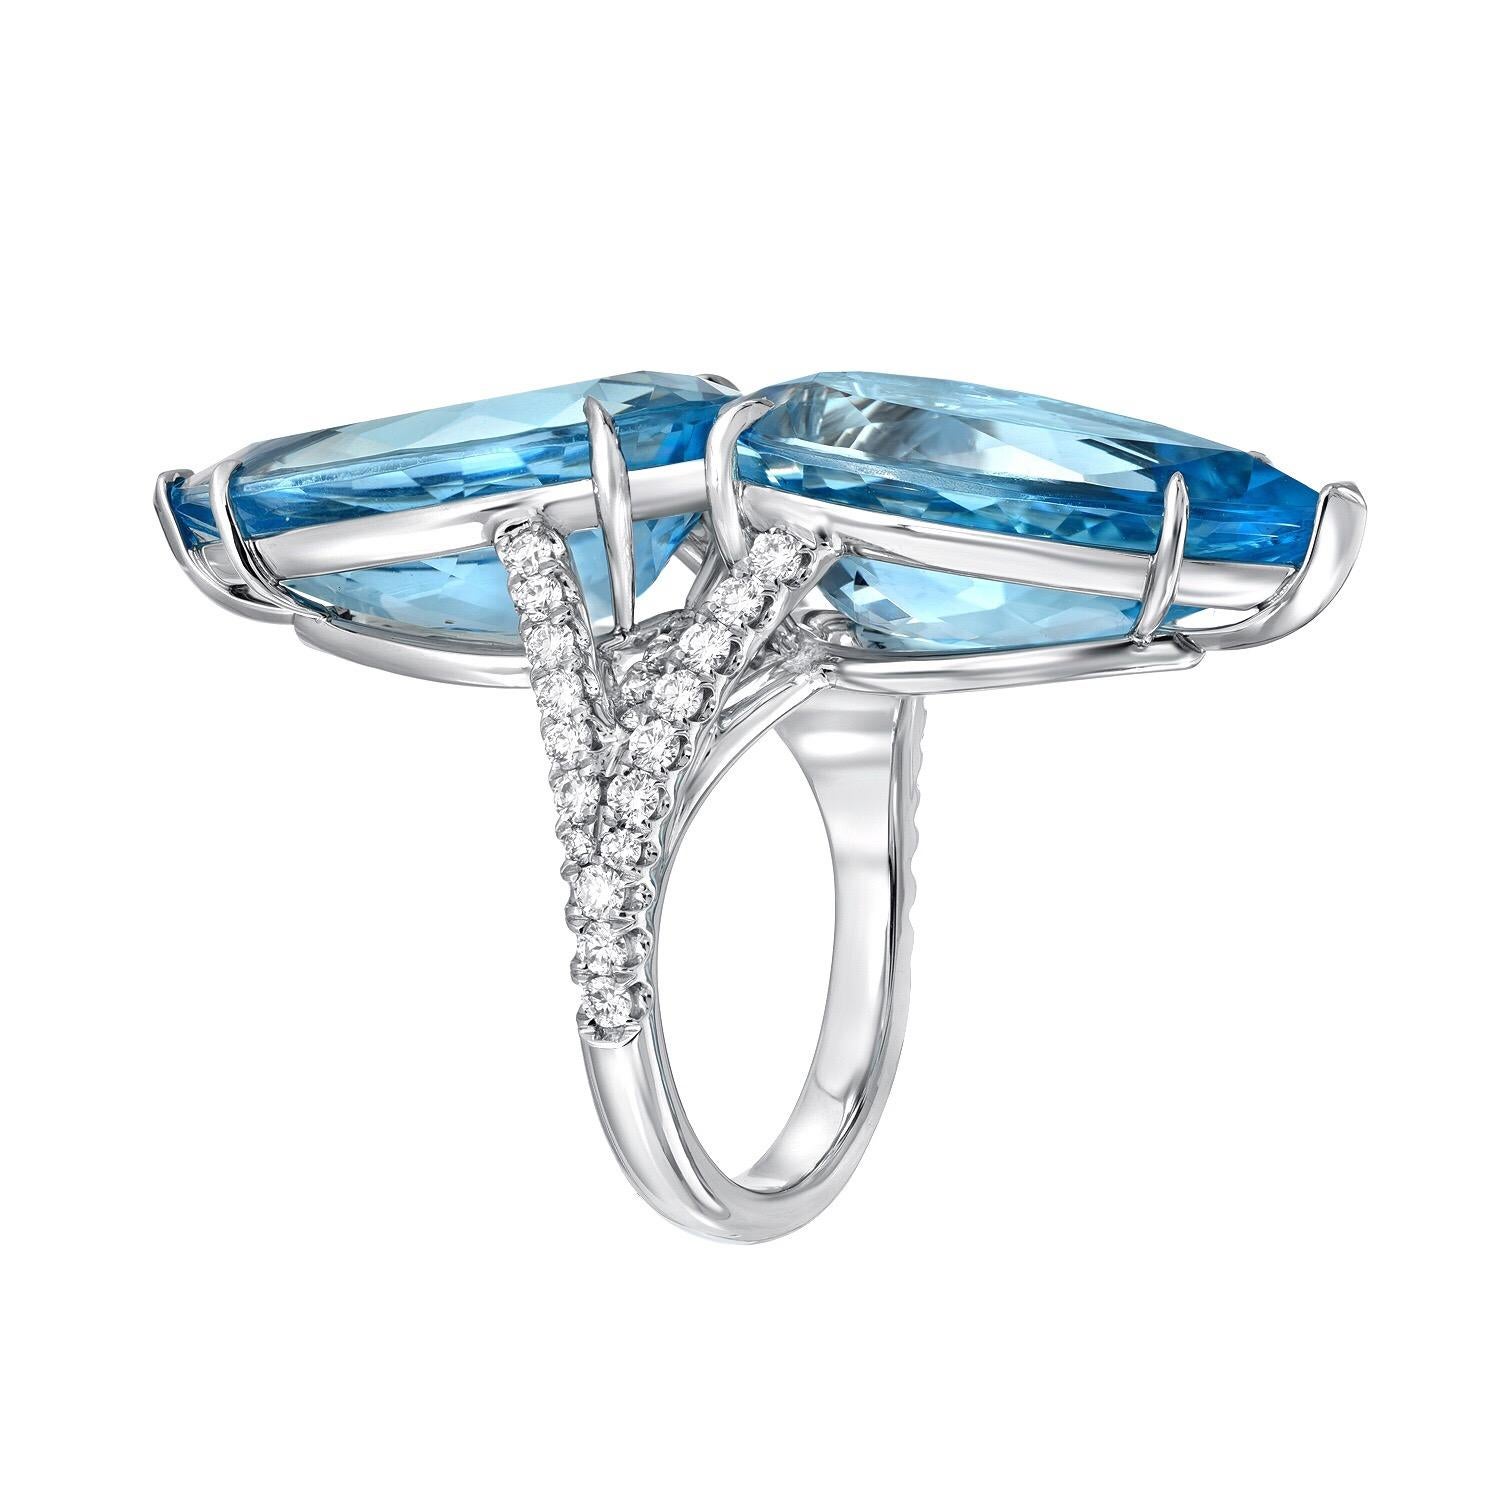 Incredible pair of vivid blue Aquamarine pear shapes, weighing a total of 18.59 carats, and a total of 0.80 carats of round brilliant diamonds, are set together to compose this magnificent hand crafted platinum diamond ring.
Size 6. Resizing is